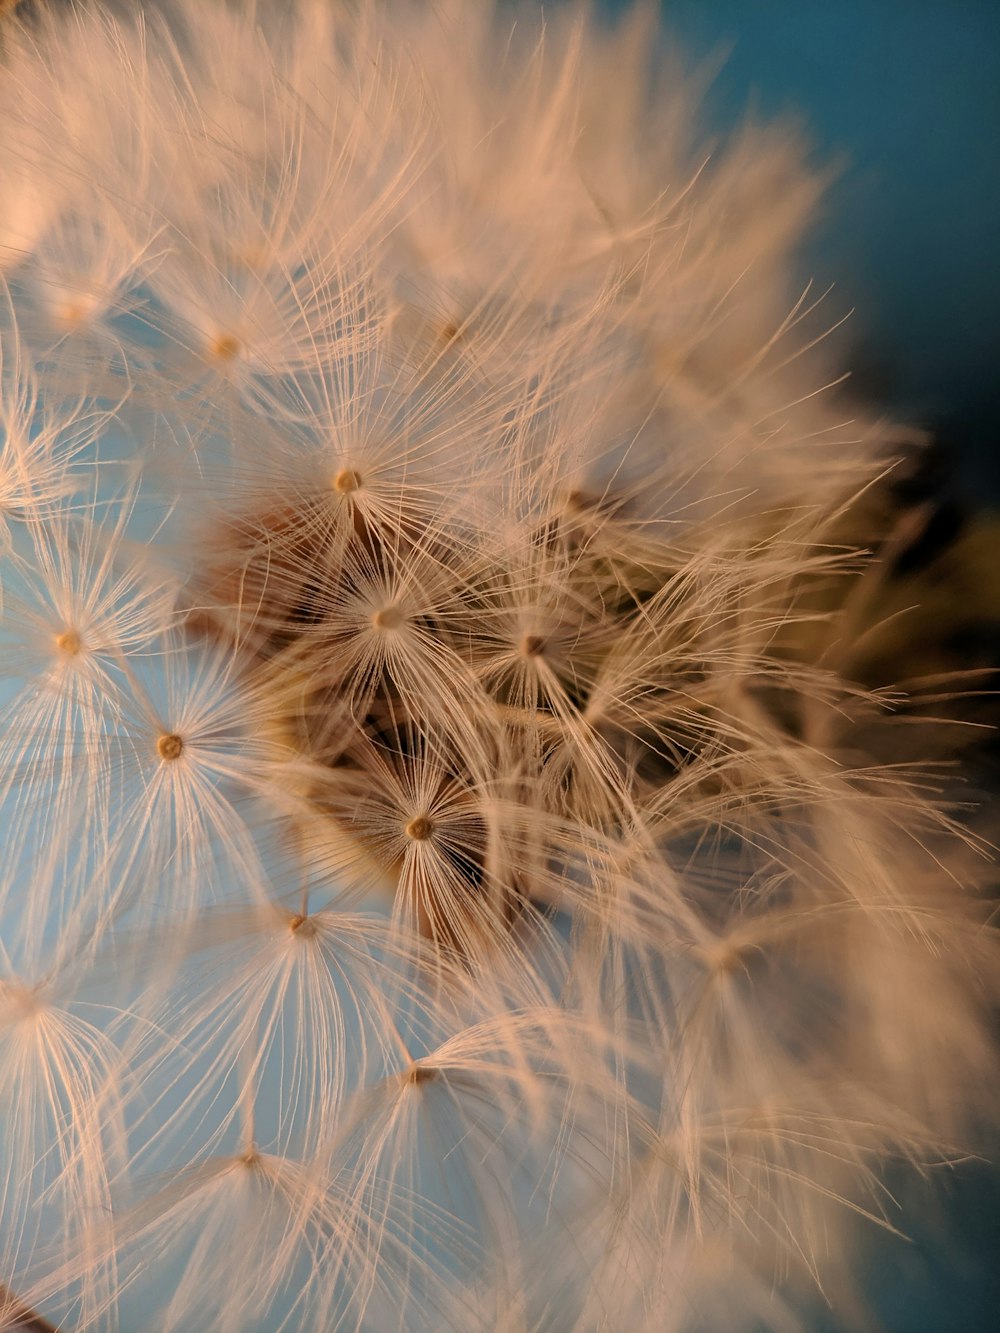 a close up of a dandelion with a blue sky in the background